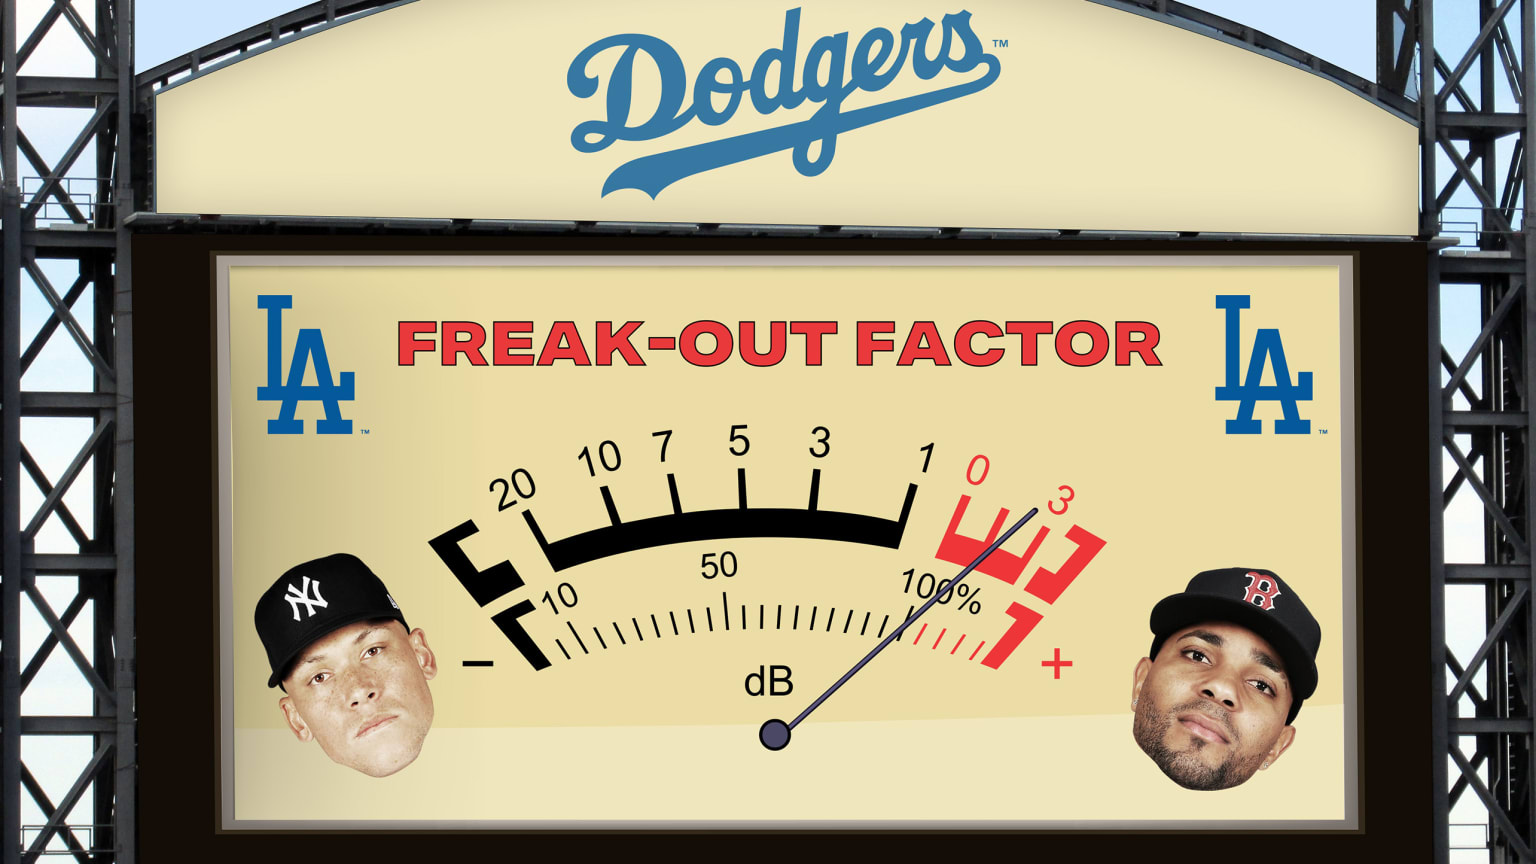 A scoreboard with the Dodgers logo showing a ''Freak-Out Factor meter'' with the needle in the red and the heads of Aaron Judge and Xander Bogaerts on either end